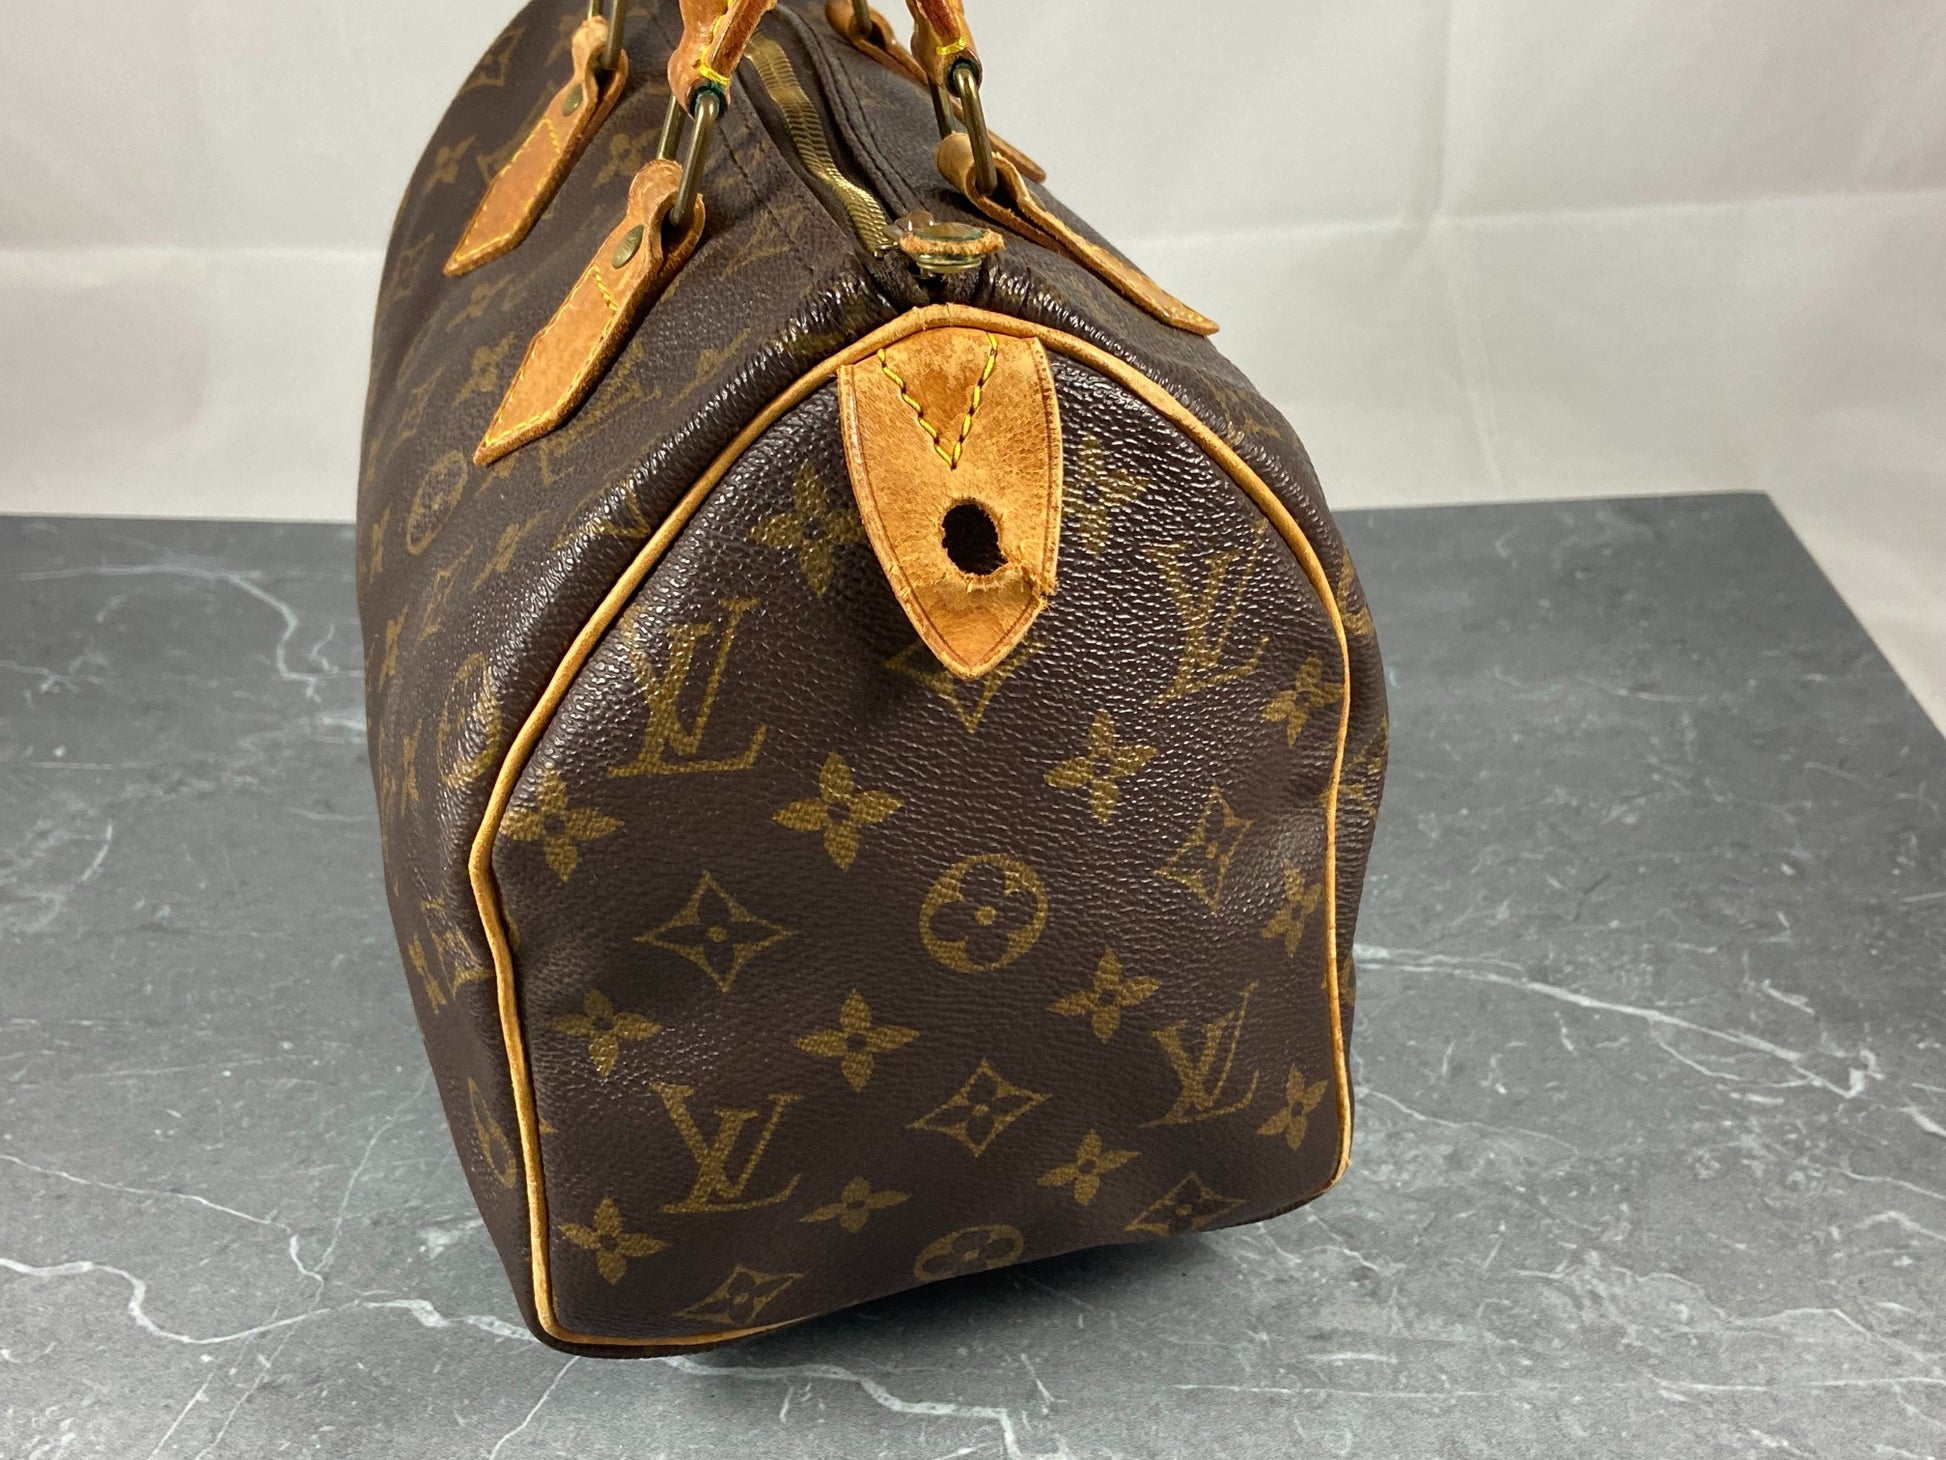 Louis Vuitton Speedy Doctor Bag Monogram Canvas and Leather 25 - ShopStyle